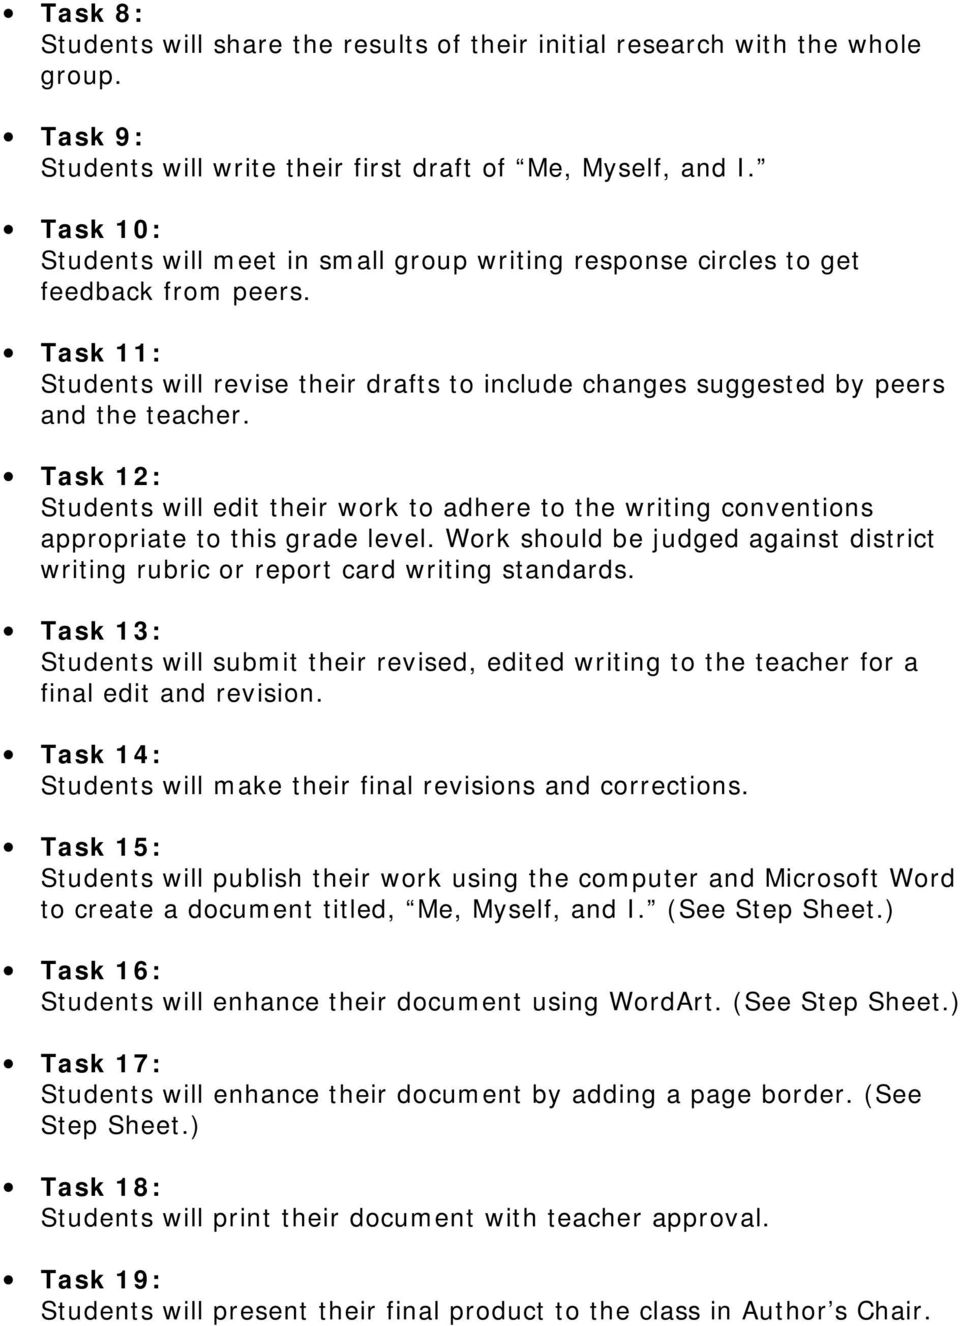 Task 12: Students will edit their work to adhere to the writing conventions appropriate to this grade level. Work should be judged against district writing rubric or report card writing standards.